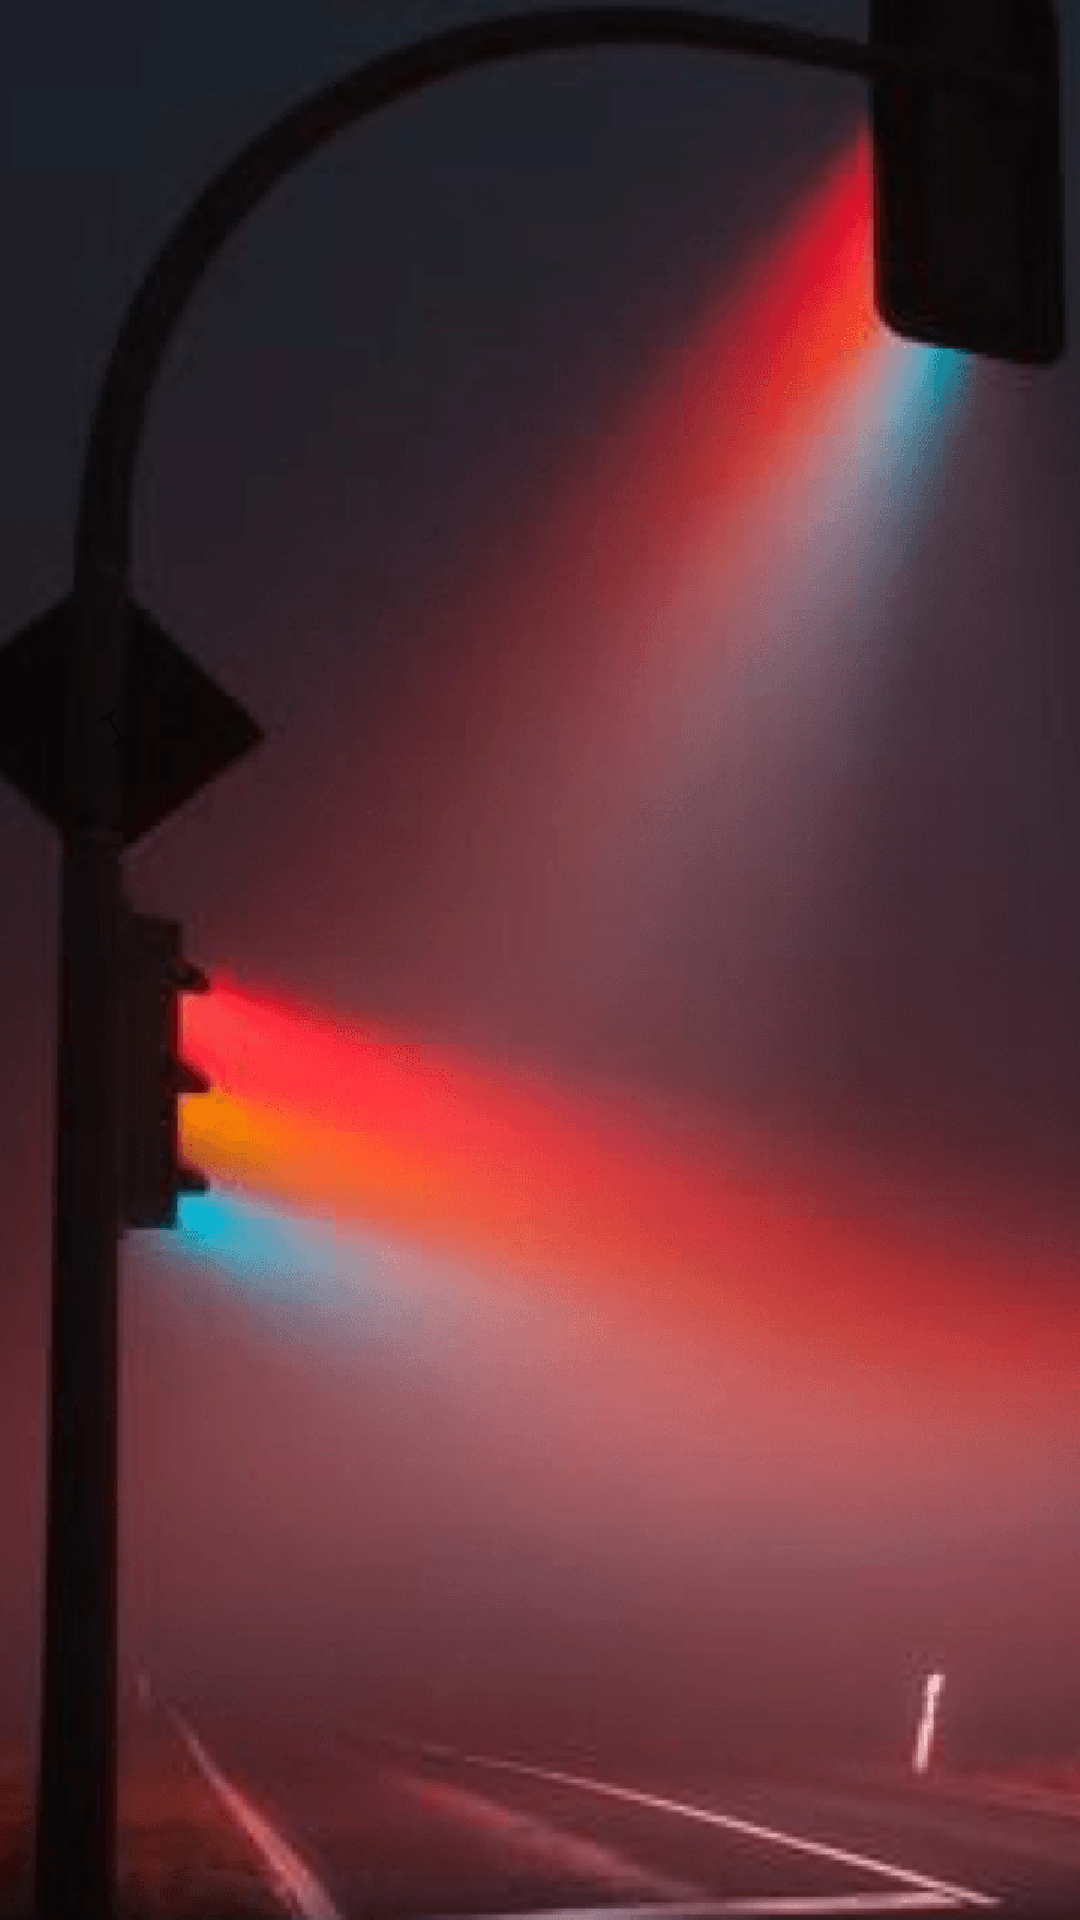 A traffic light is lit up with a rainbow of colors. - IPhone red